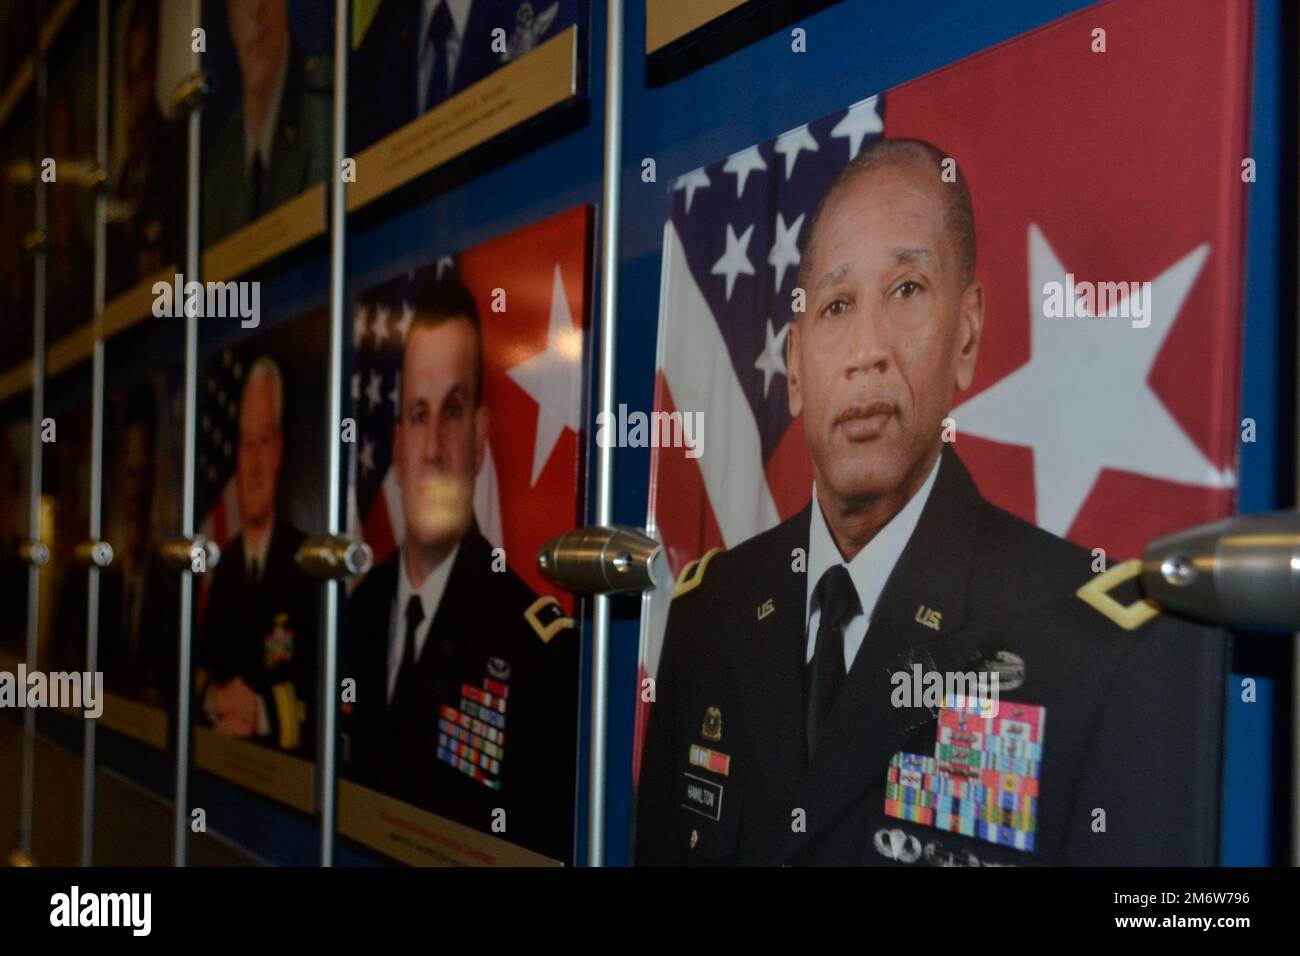 A photo of Army Lt. Gen. Charles R. Hamilton, Deputy Chief of Staff of Army Logistics and former commander of the Defense Logistics Agency Troop Support adorns the wall alongside other former commanders. Hamilton was formally inducted into the DLA Troop Support's Hall of Fame May 6, 2022 in Philadelphia. While included in the 2019 induction, Hamilton was unable to formally receive the honor due to COVID-19 restrictions. Stock Photo